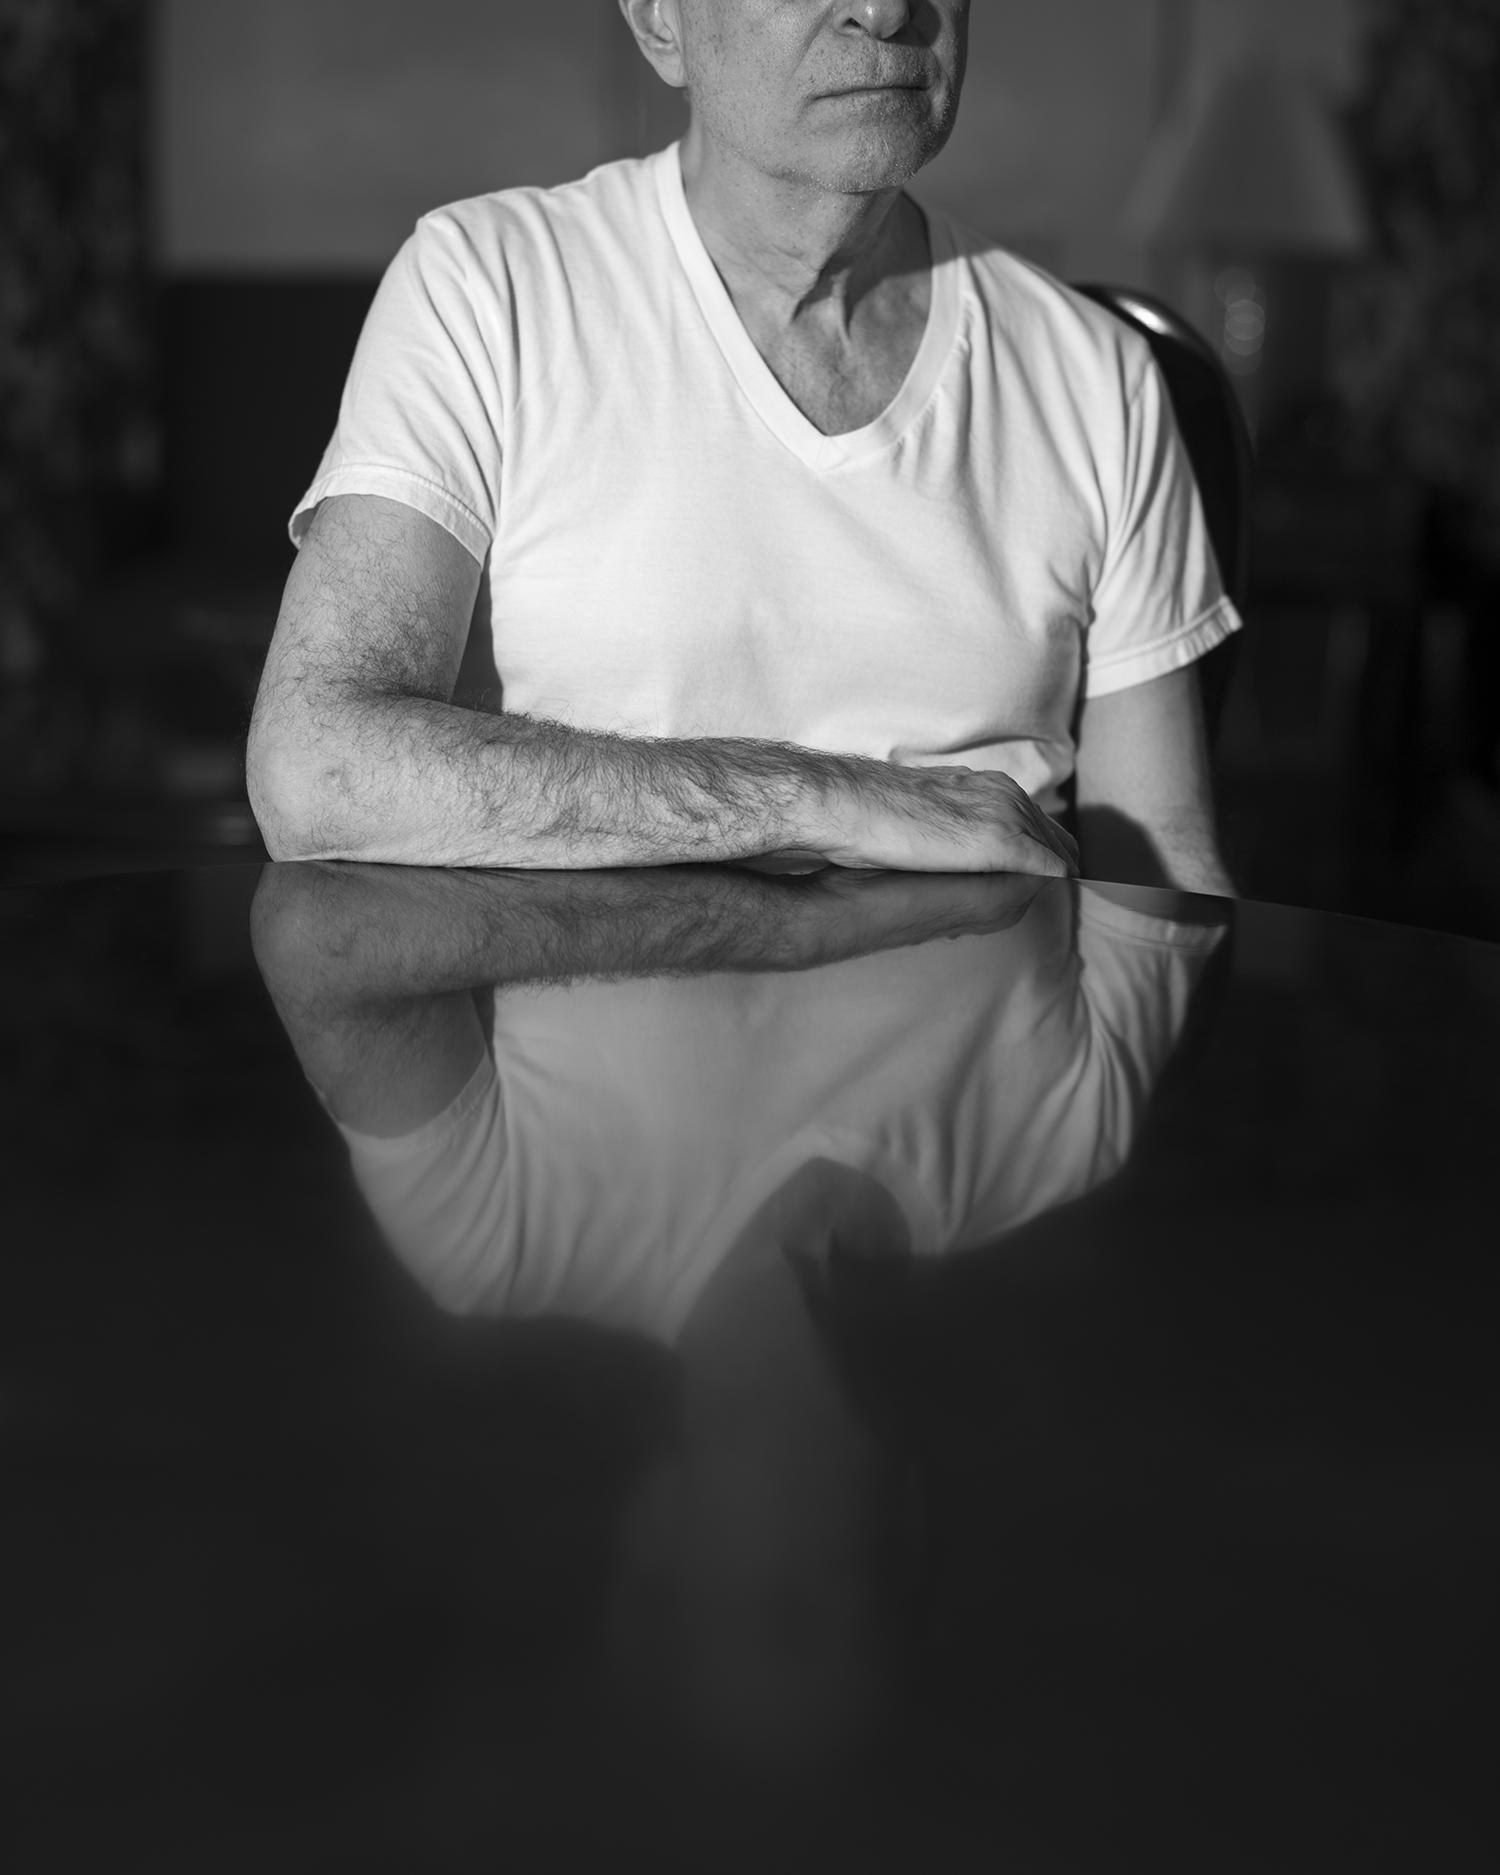 Black and white pigment print of man sitting with his obscured image reflected in dining room table.